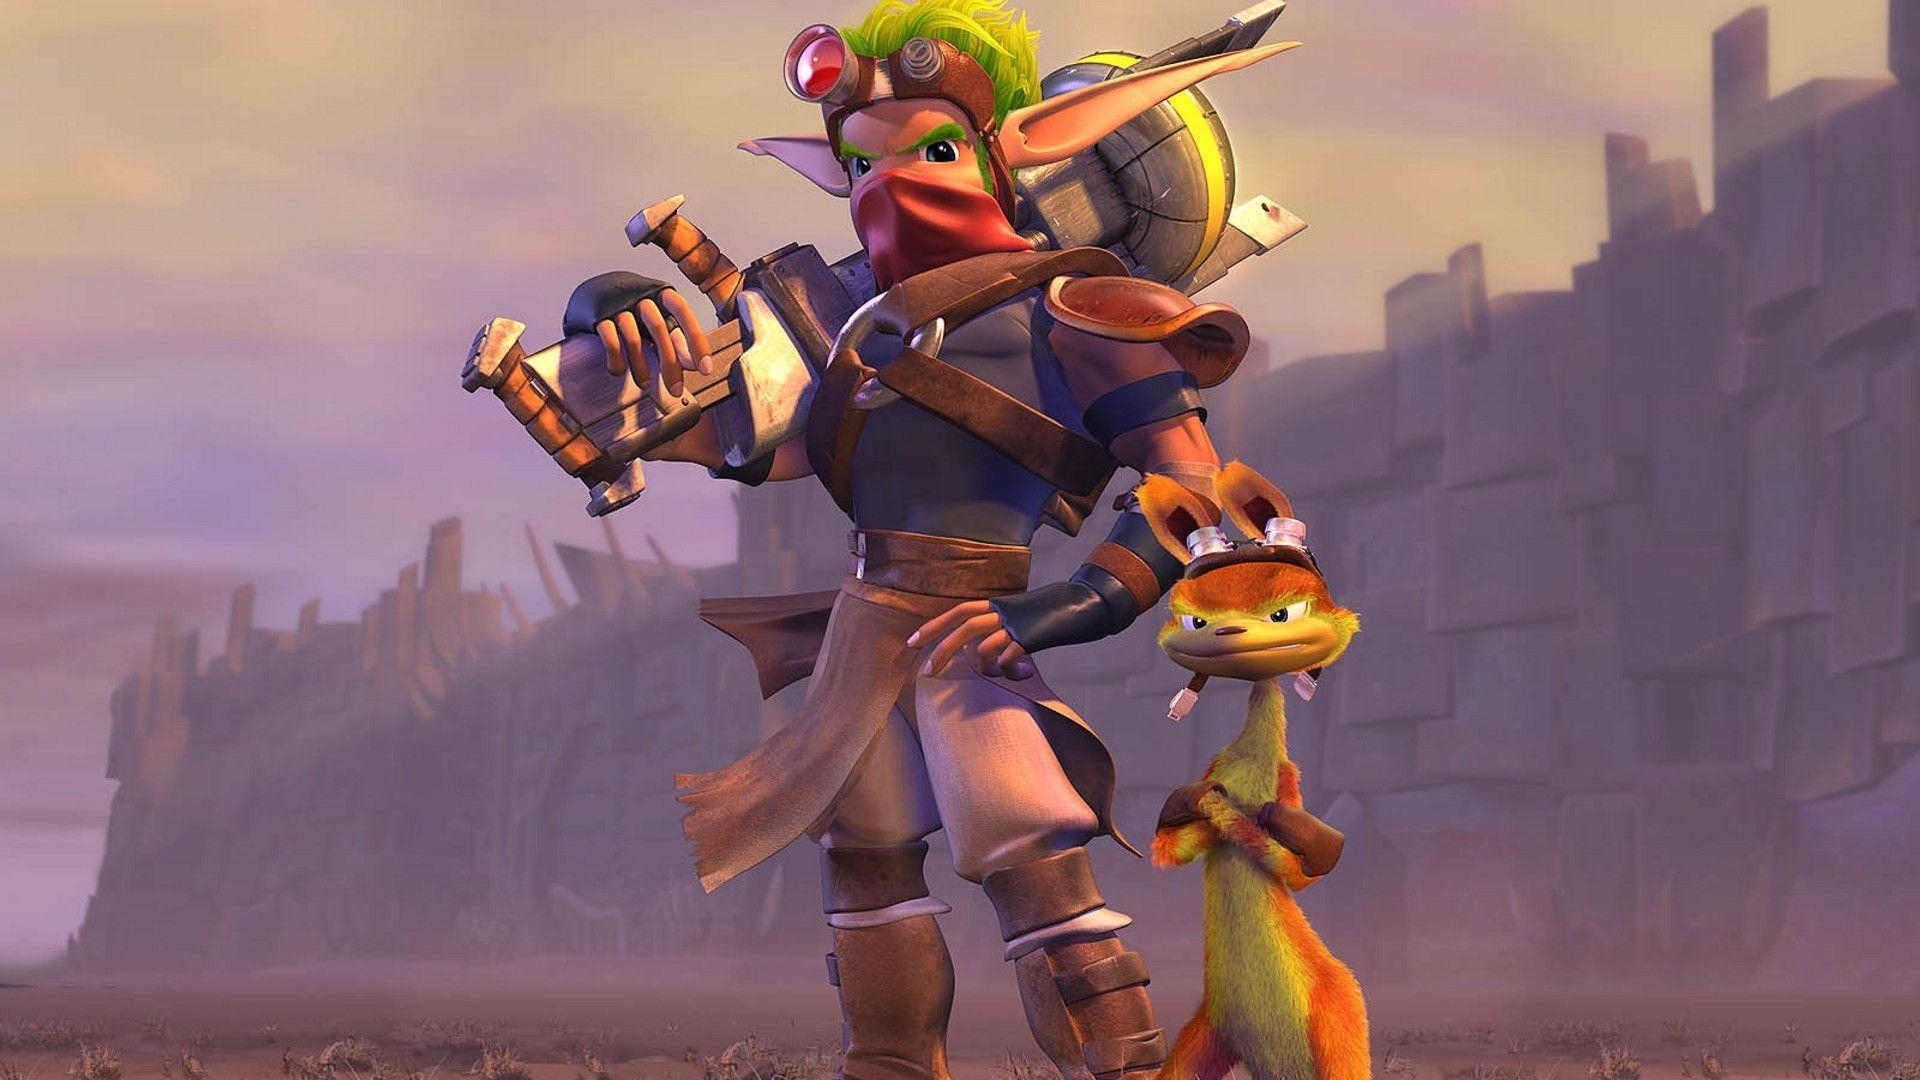 jak and daxter wallpapers - wallpaper cave